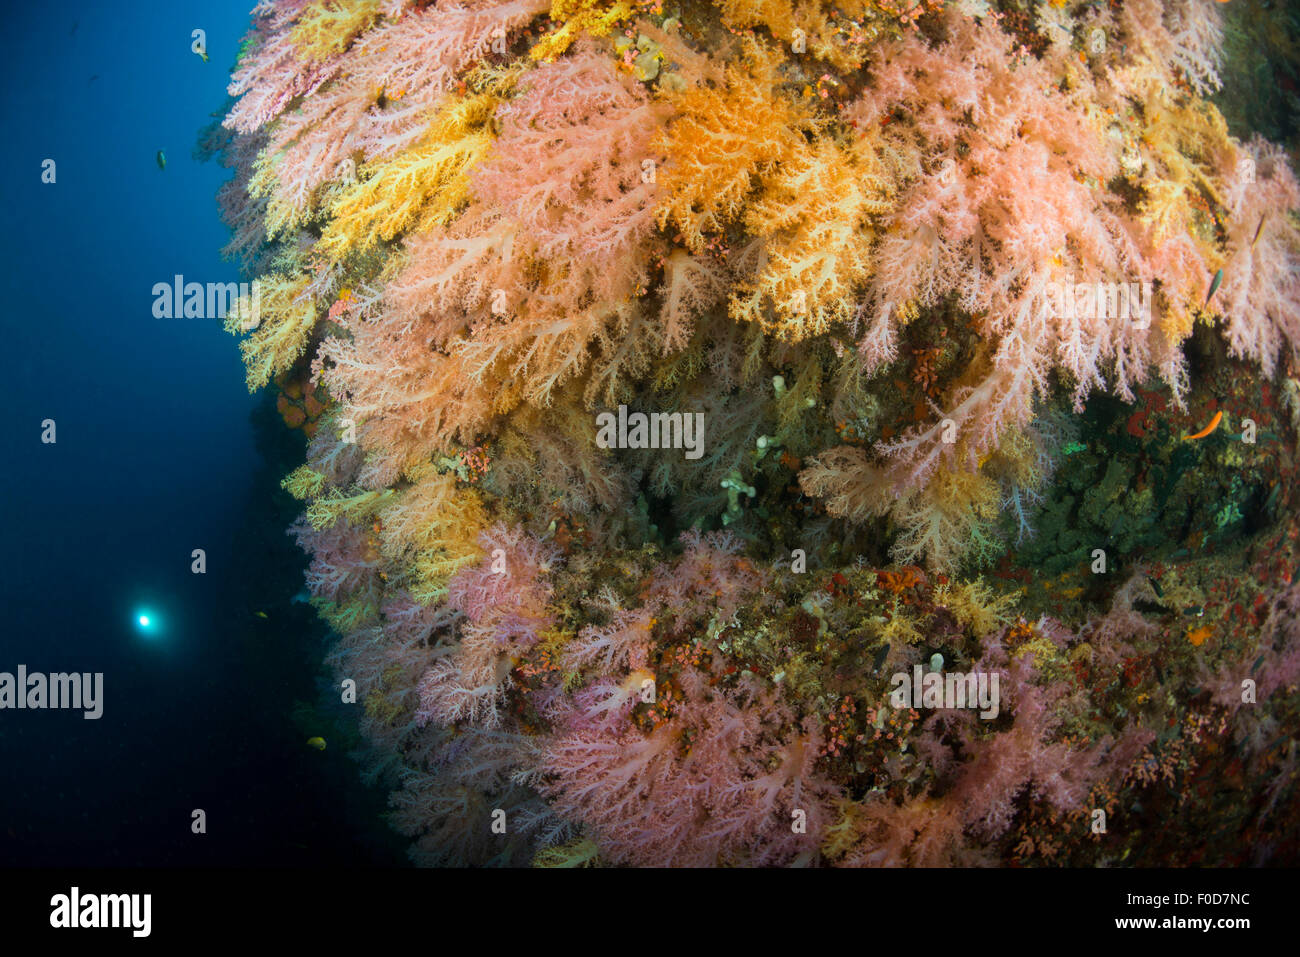 Diver in the distance shining his torch onto brightly colored forests of yellow, orange and pink soft coral, Cebu, Philippines. Stock Photo